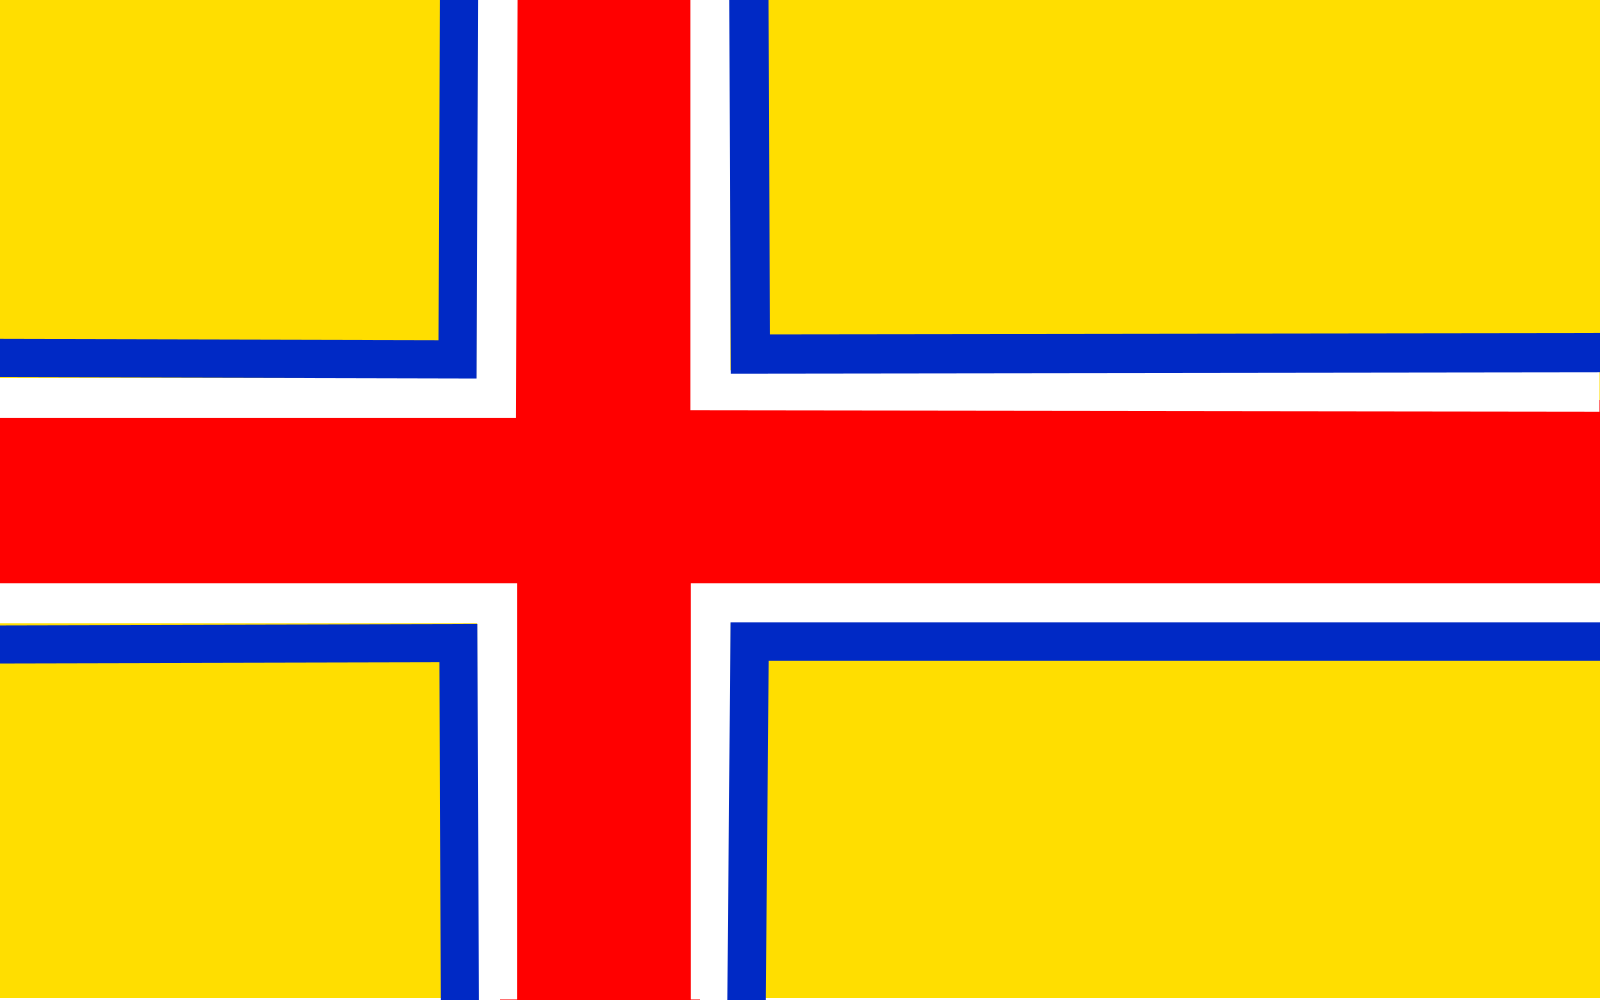 Federation of Nordic Peoples (ver. 3).png